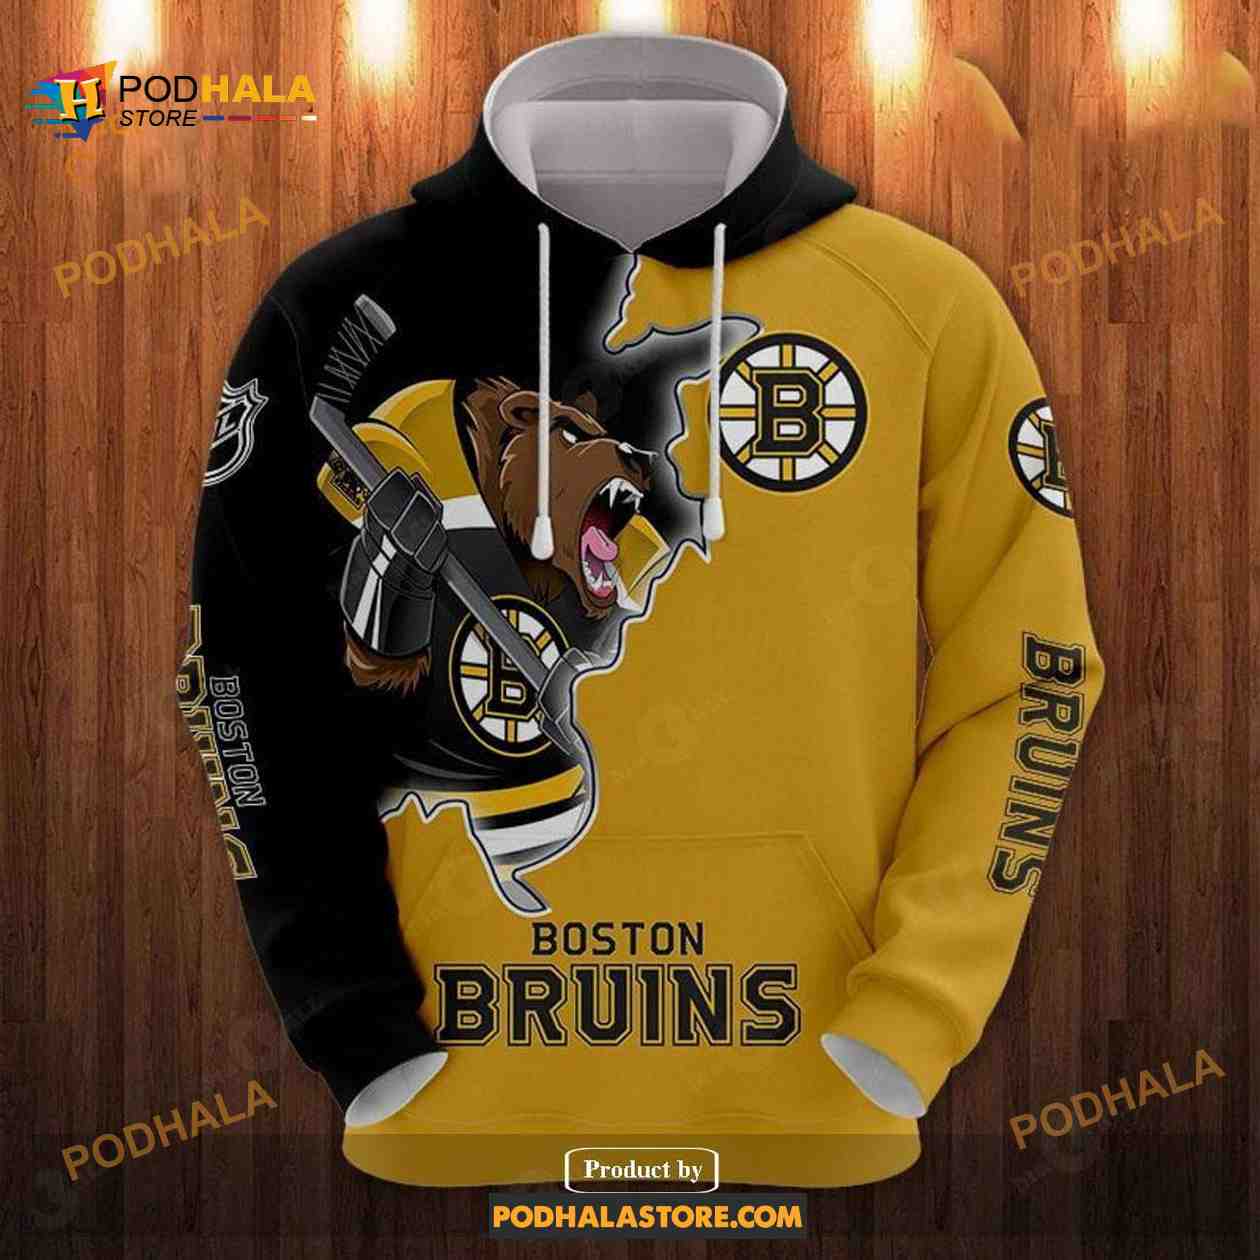 Boston Bruins Shirt Black Logo Classic Bruins Gift - Personalized Gifts:  Family, Sports, Occasions, Trending